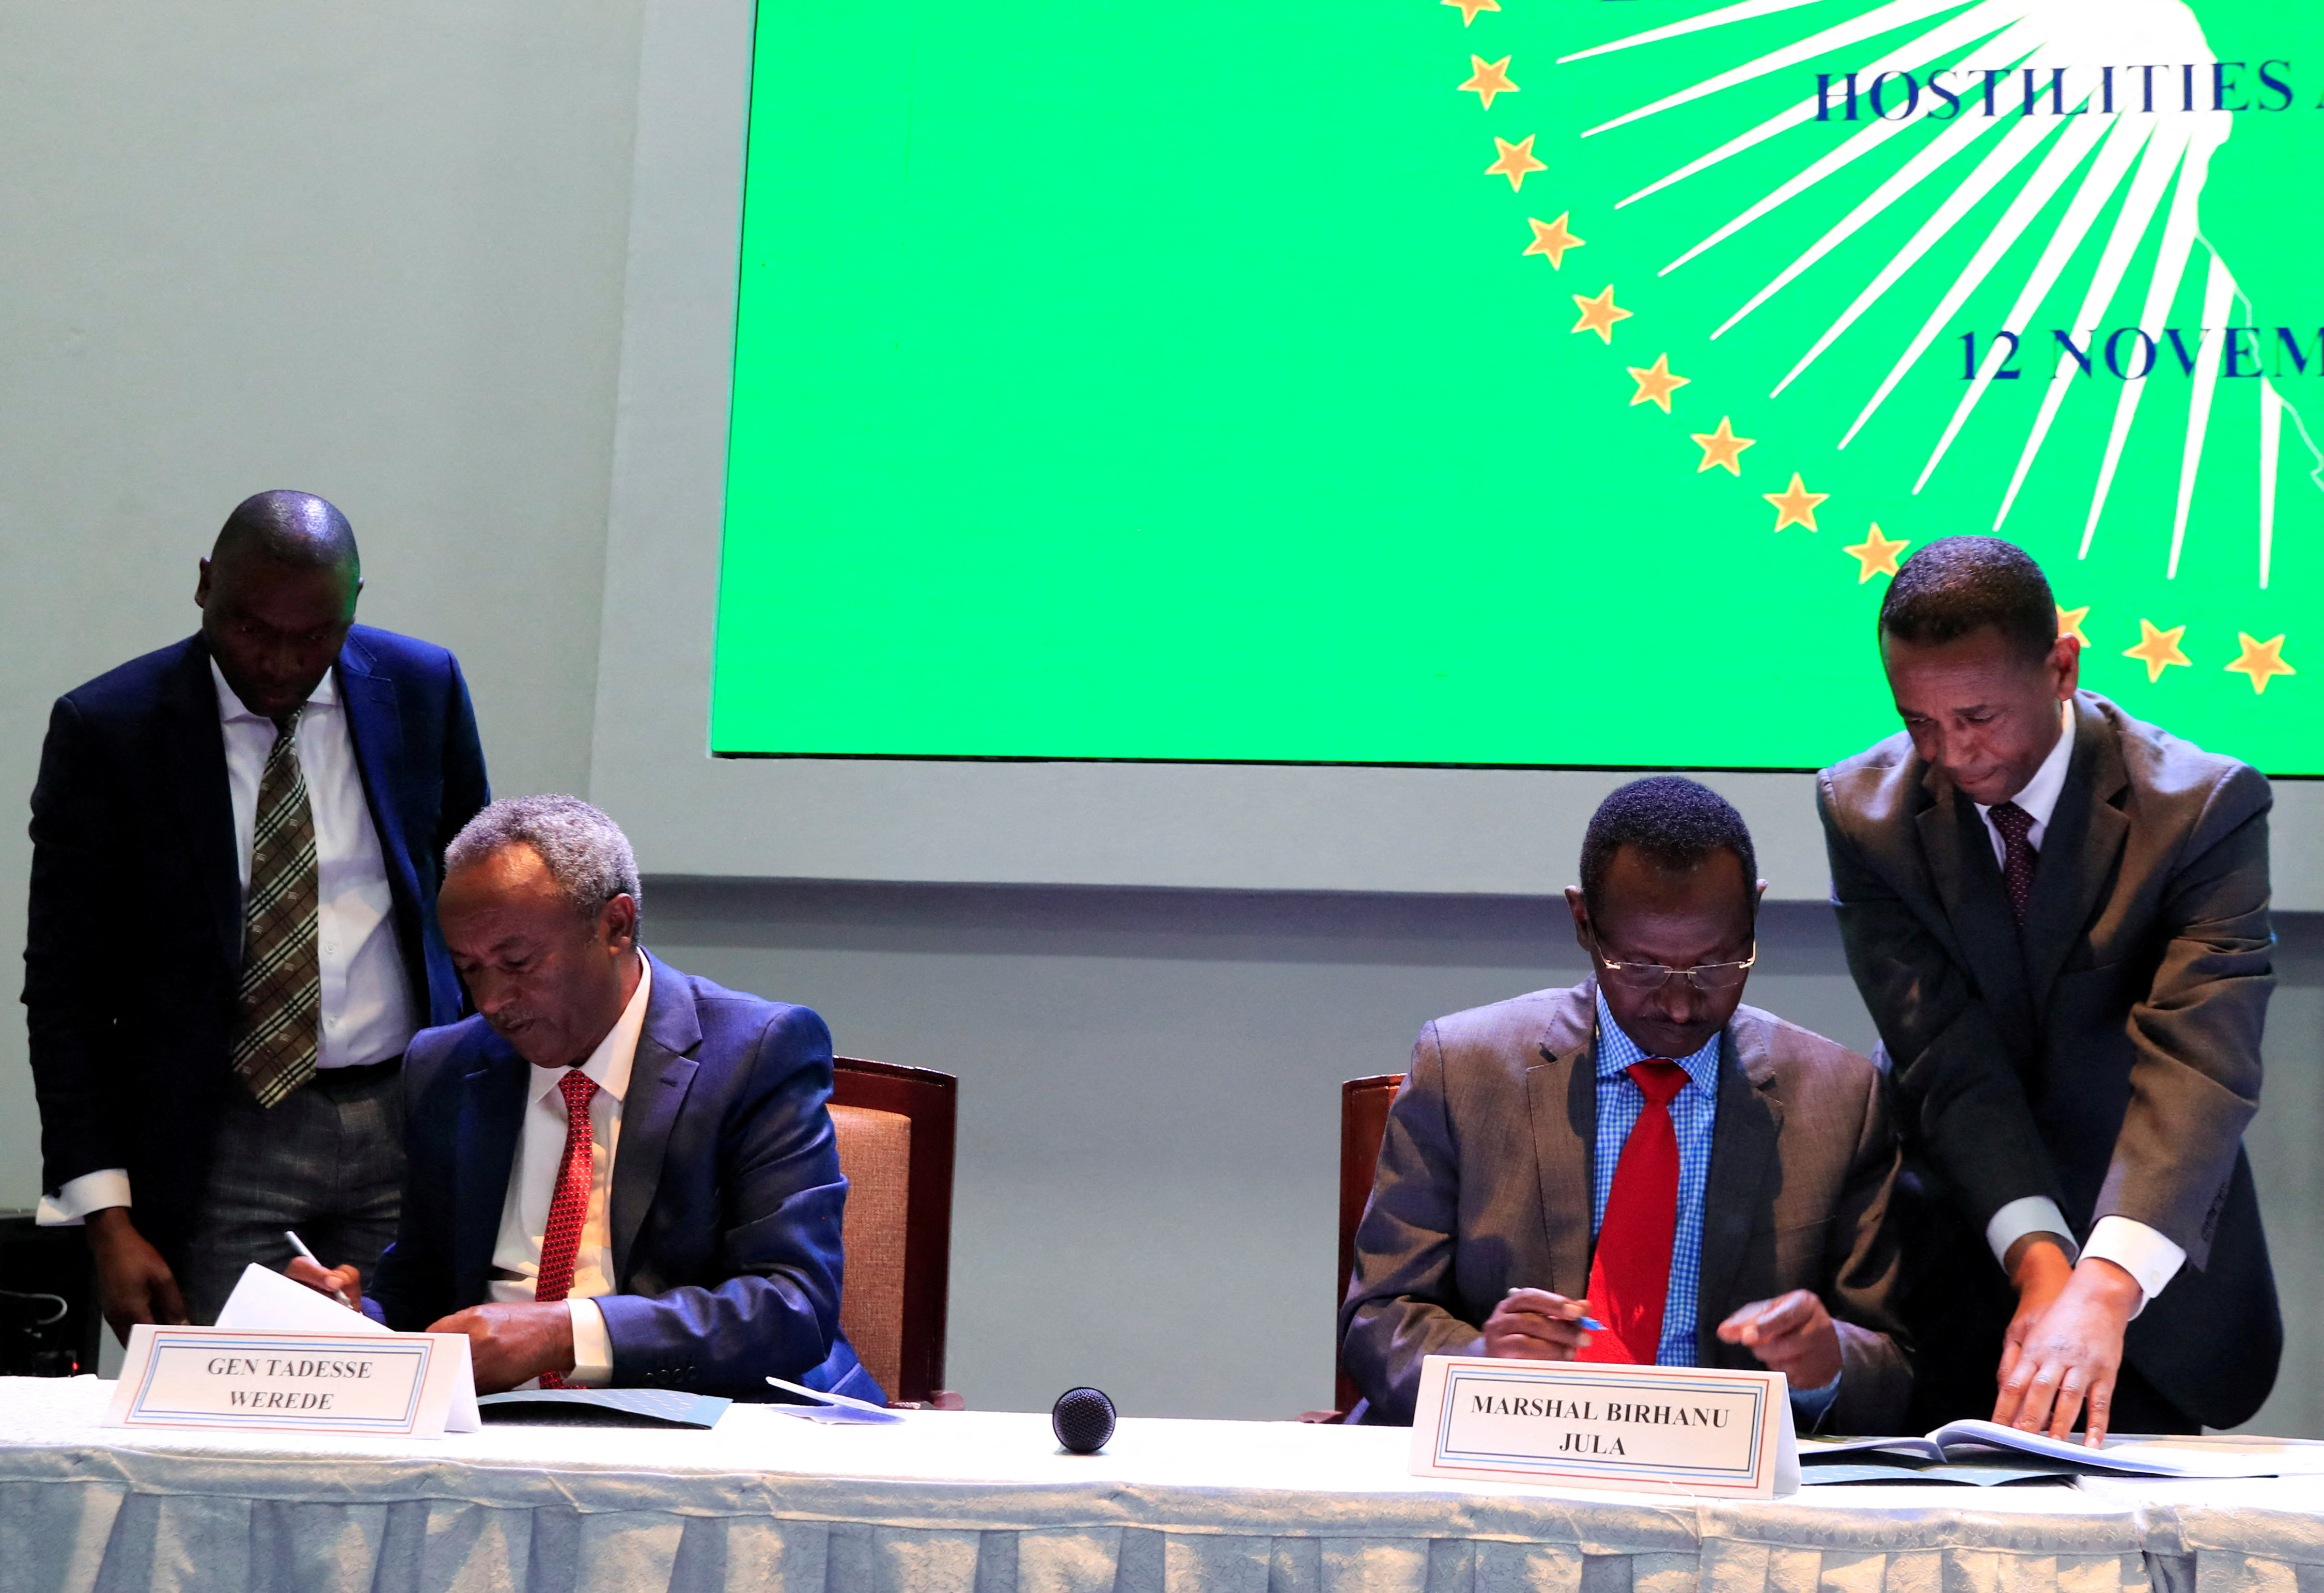 Field Marshal of the Ethiopian National Defence Force Birhanu Jula and Tadesse Werede Tesfay of the Tigray forces sign the implementation of the cessation of hostilities in Nairobi